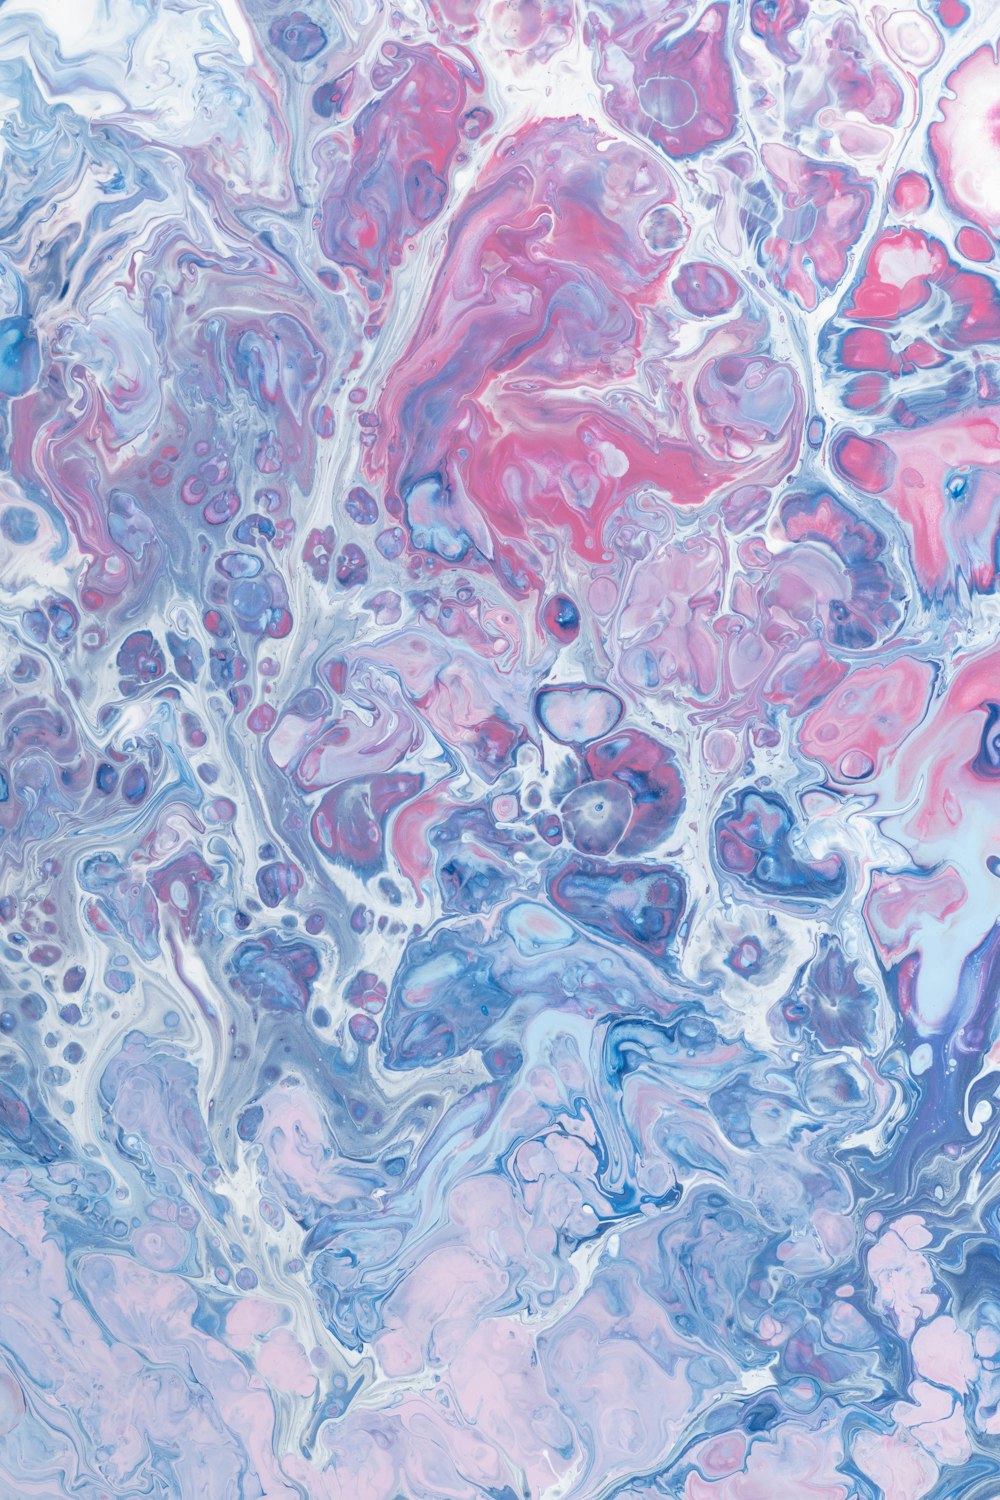 a close up of an abstract painting with blue, pink, and purple colors